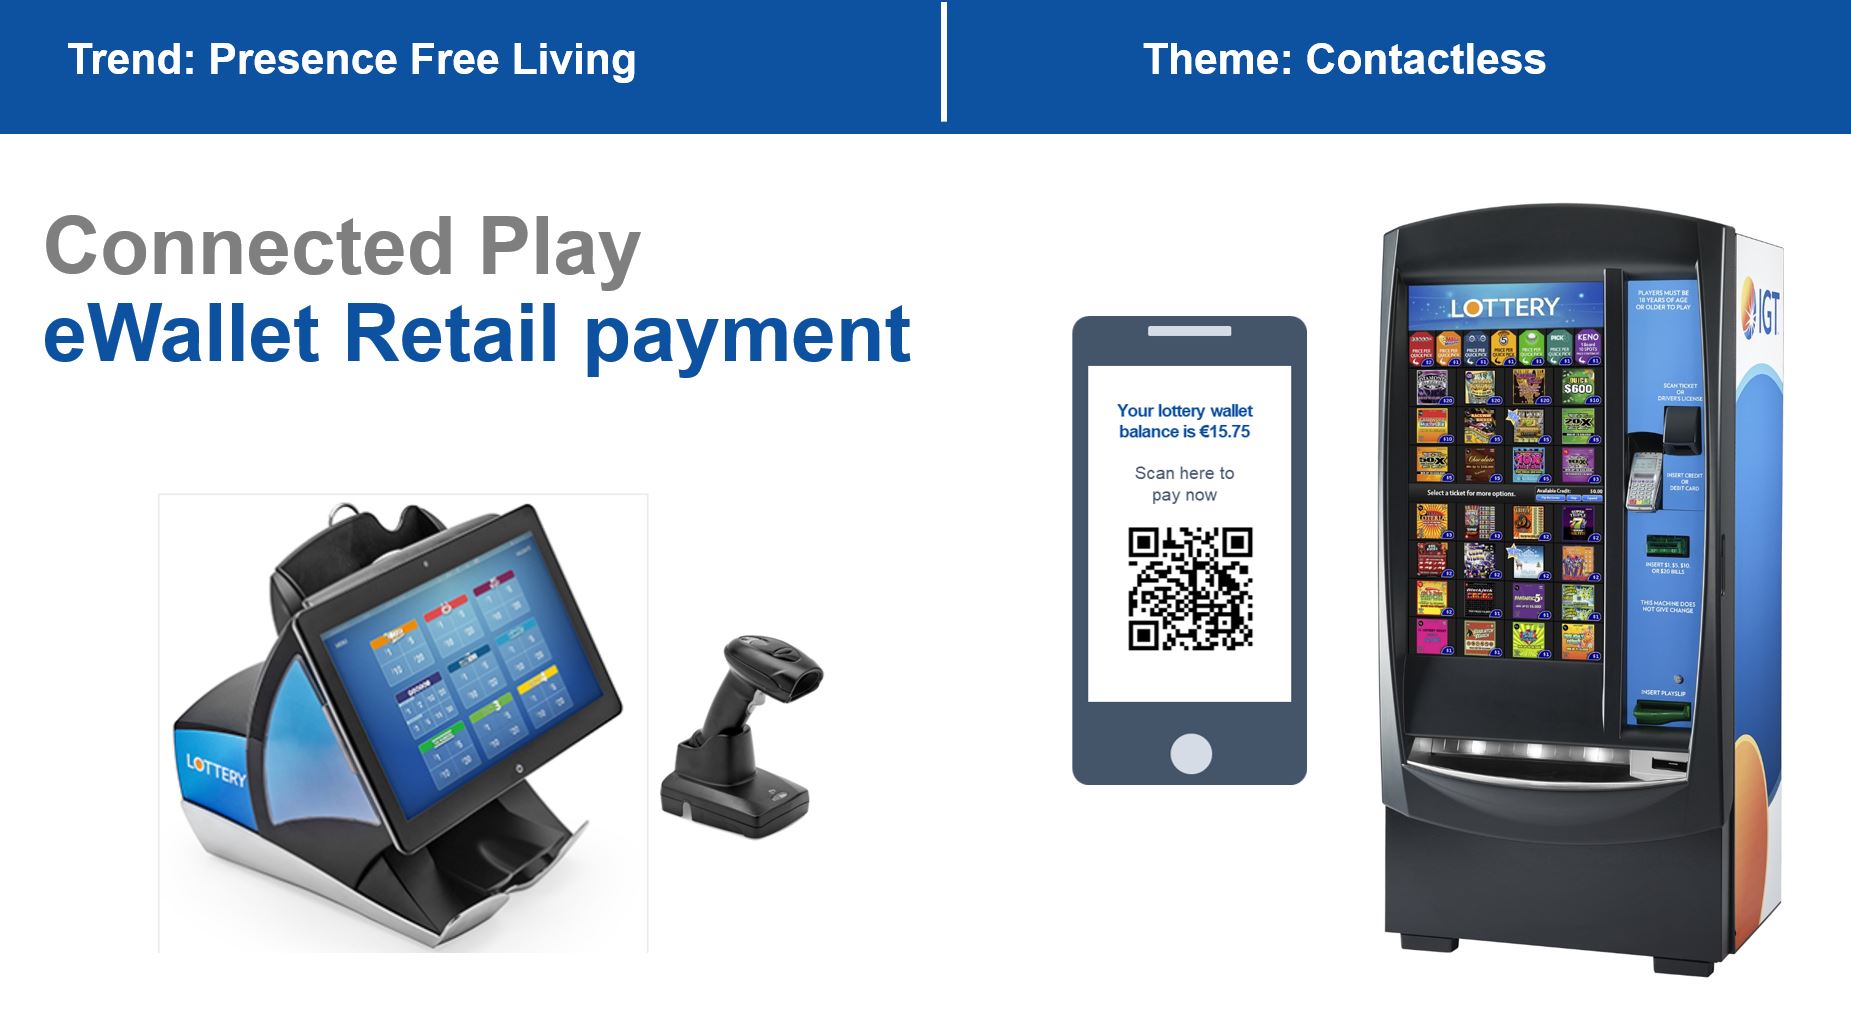 a retail terminal, mobile phone, and lottery ticket vending machine